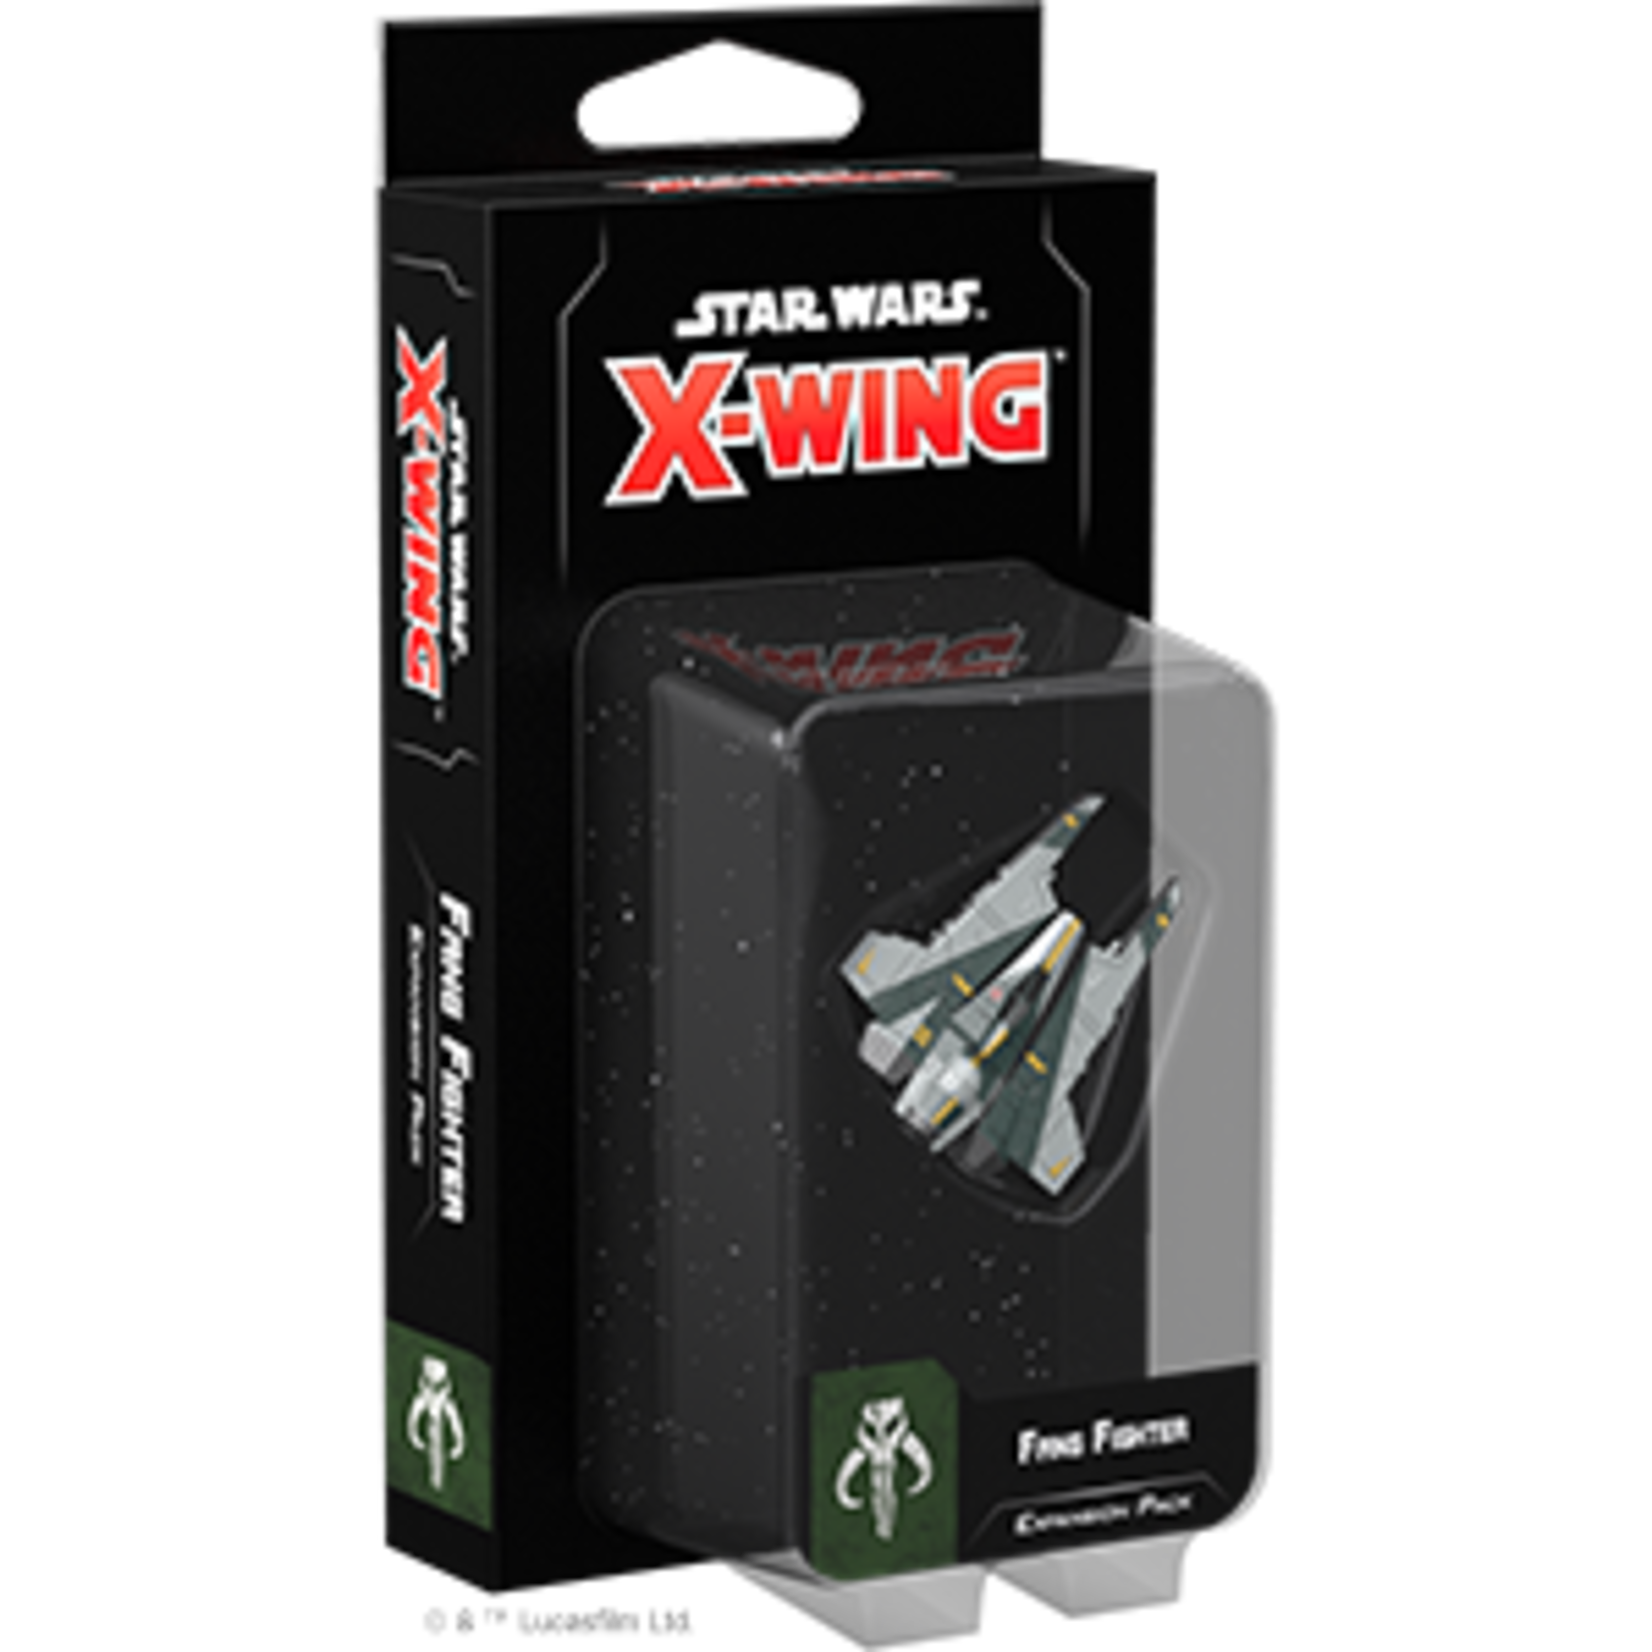 Fantasy Flight Games Star Wars X-Wing: 2nd Edition - Fang Fighter Expansion Pack